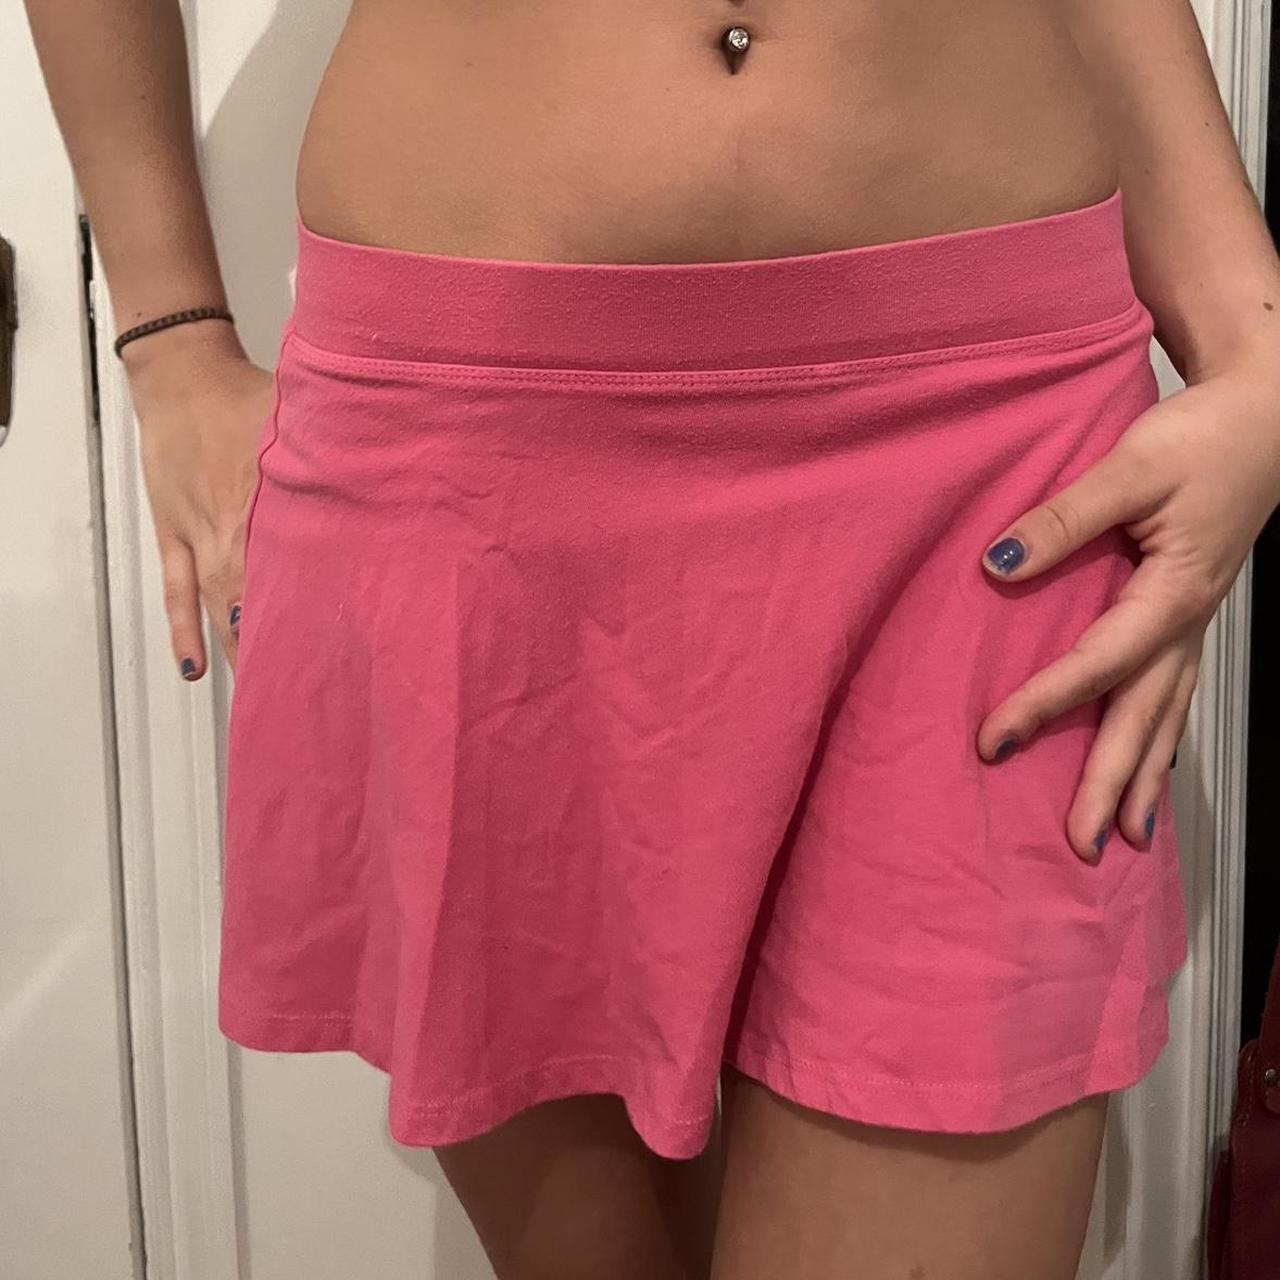 Hot pink mini skirt f yeah. Comes with built in